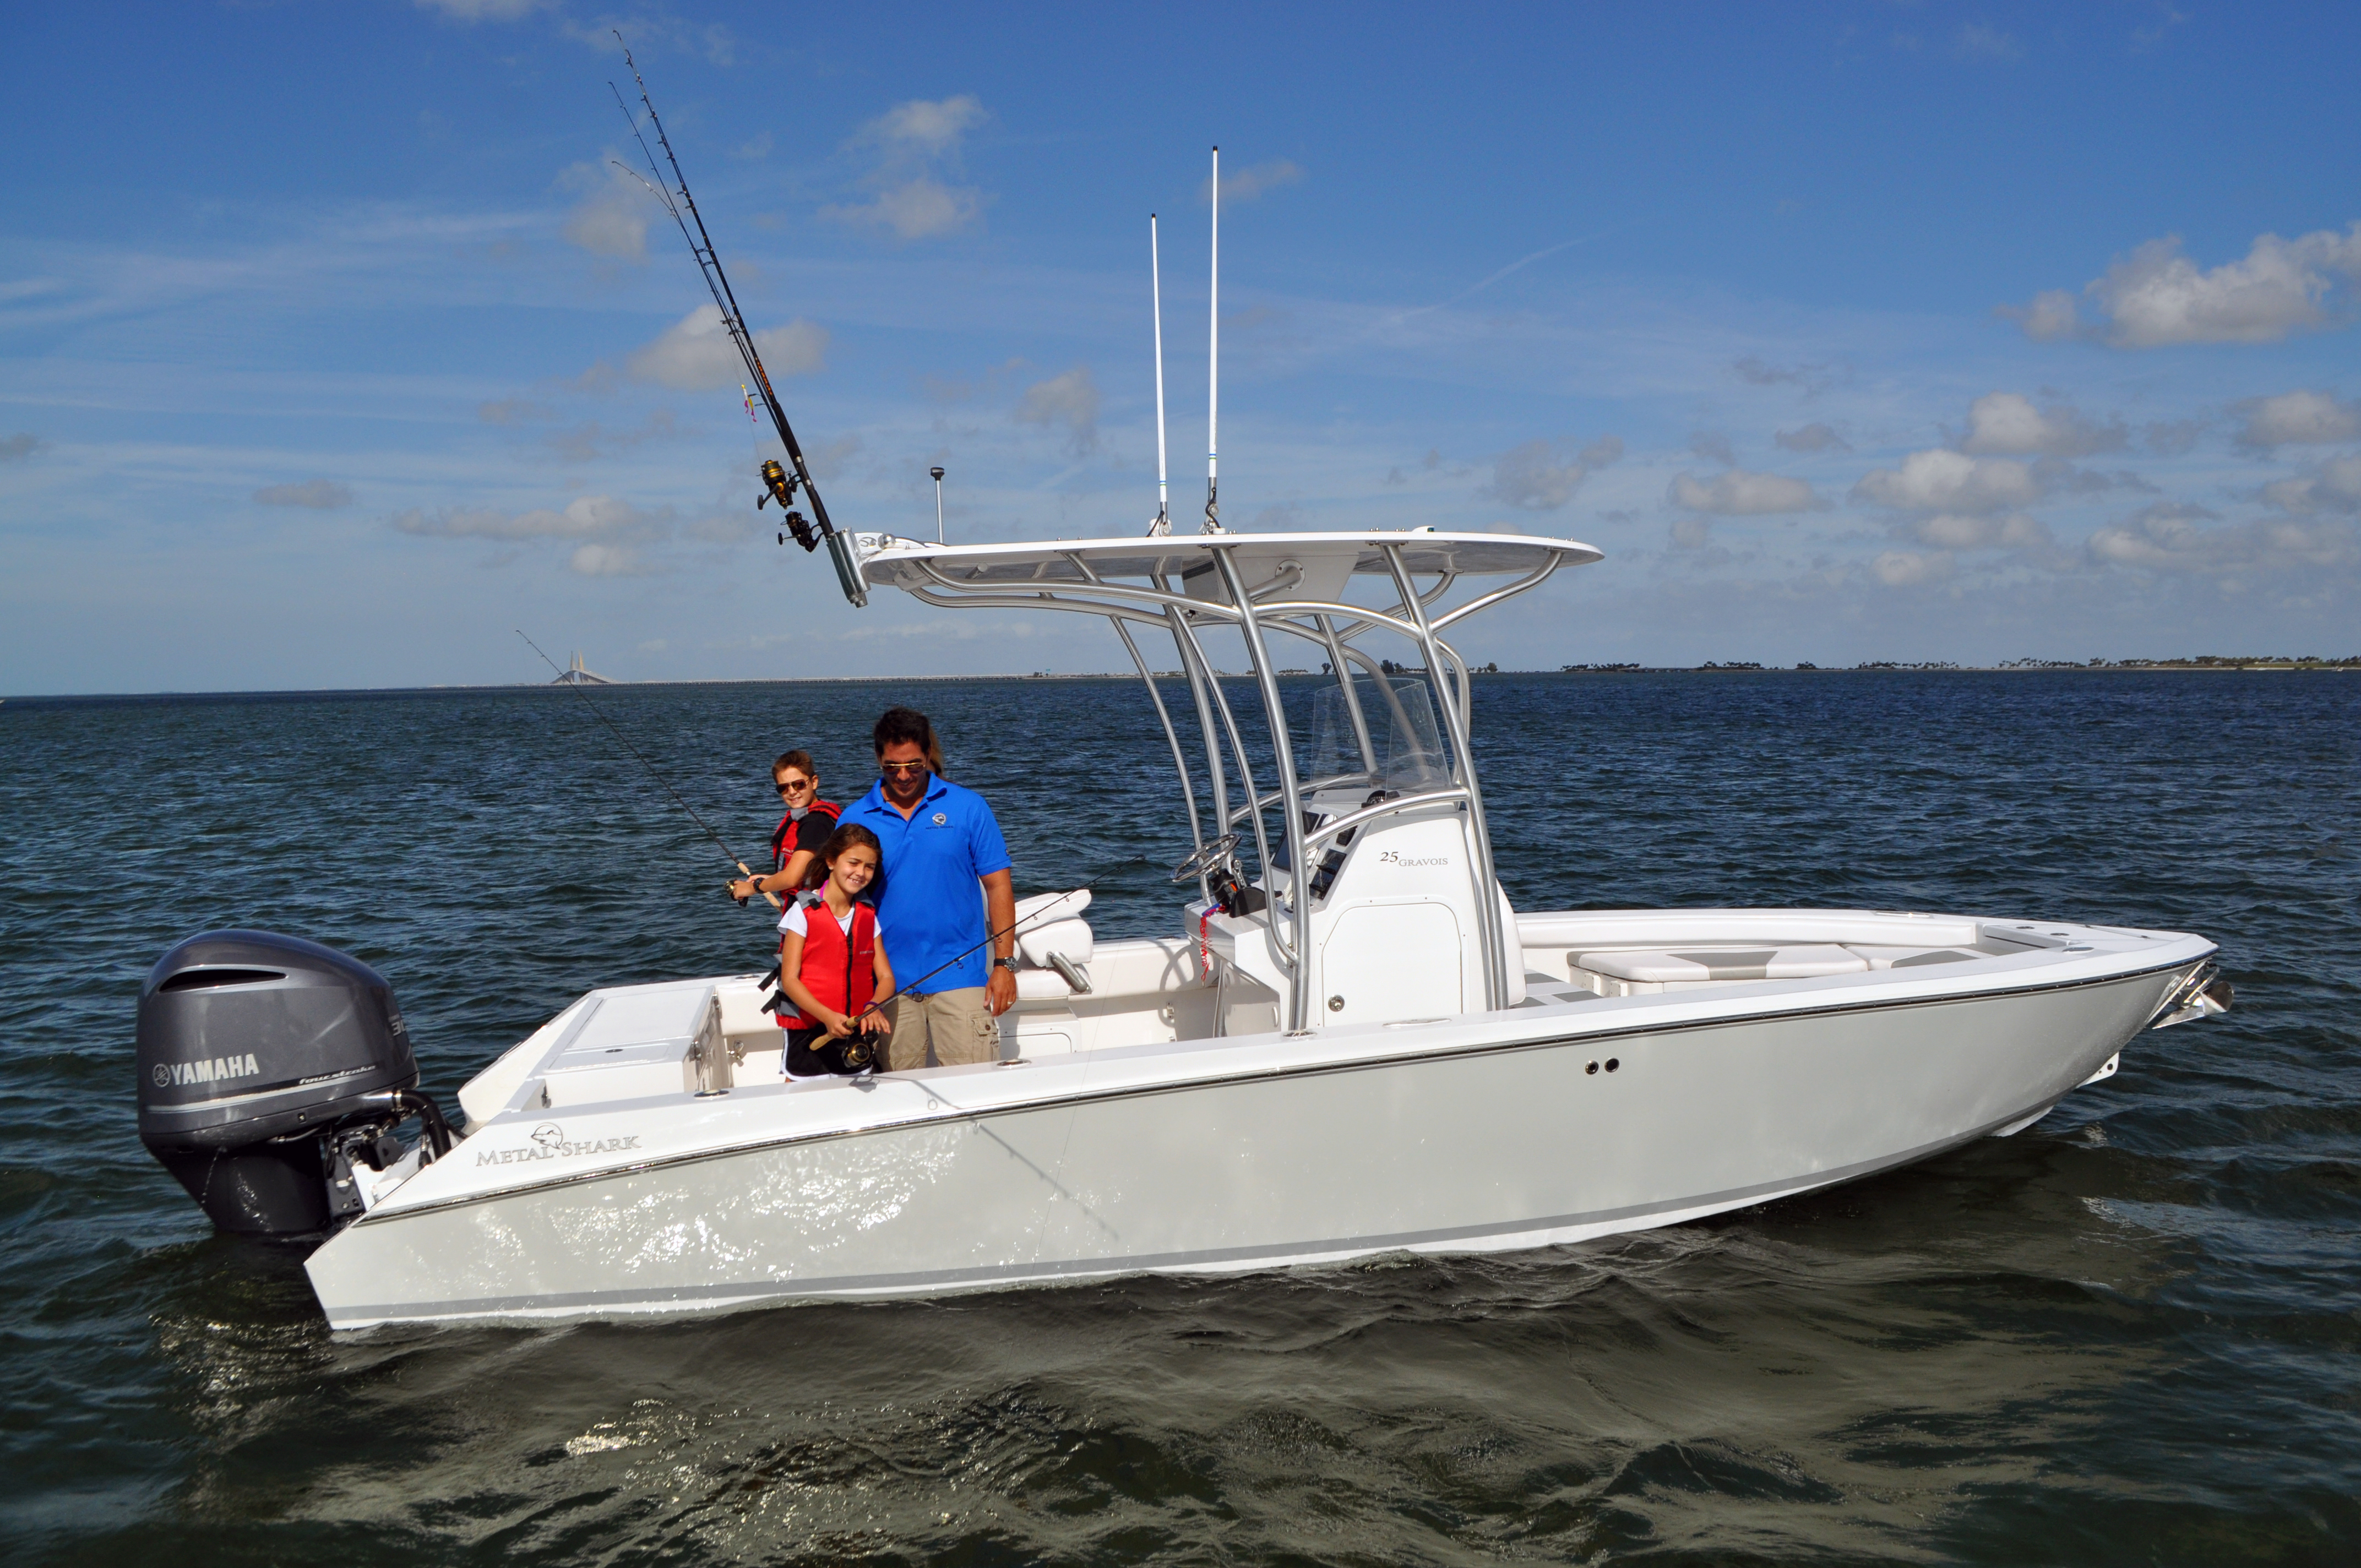 Metal Shark Introduces Aluminum 25' Bay Boat and Announces 